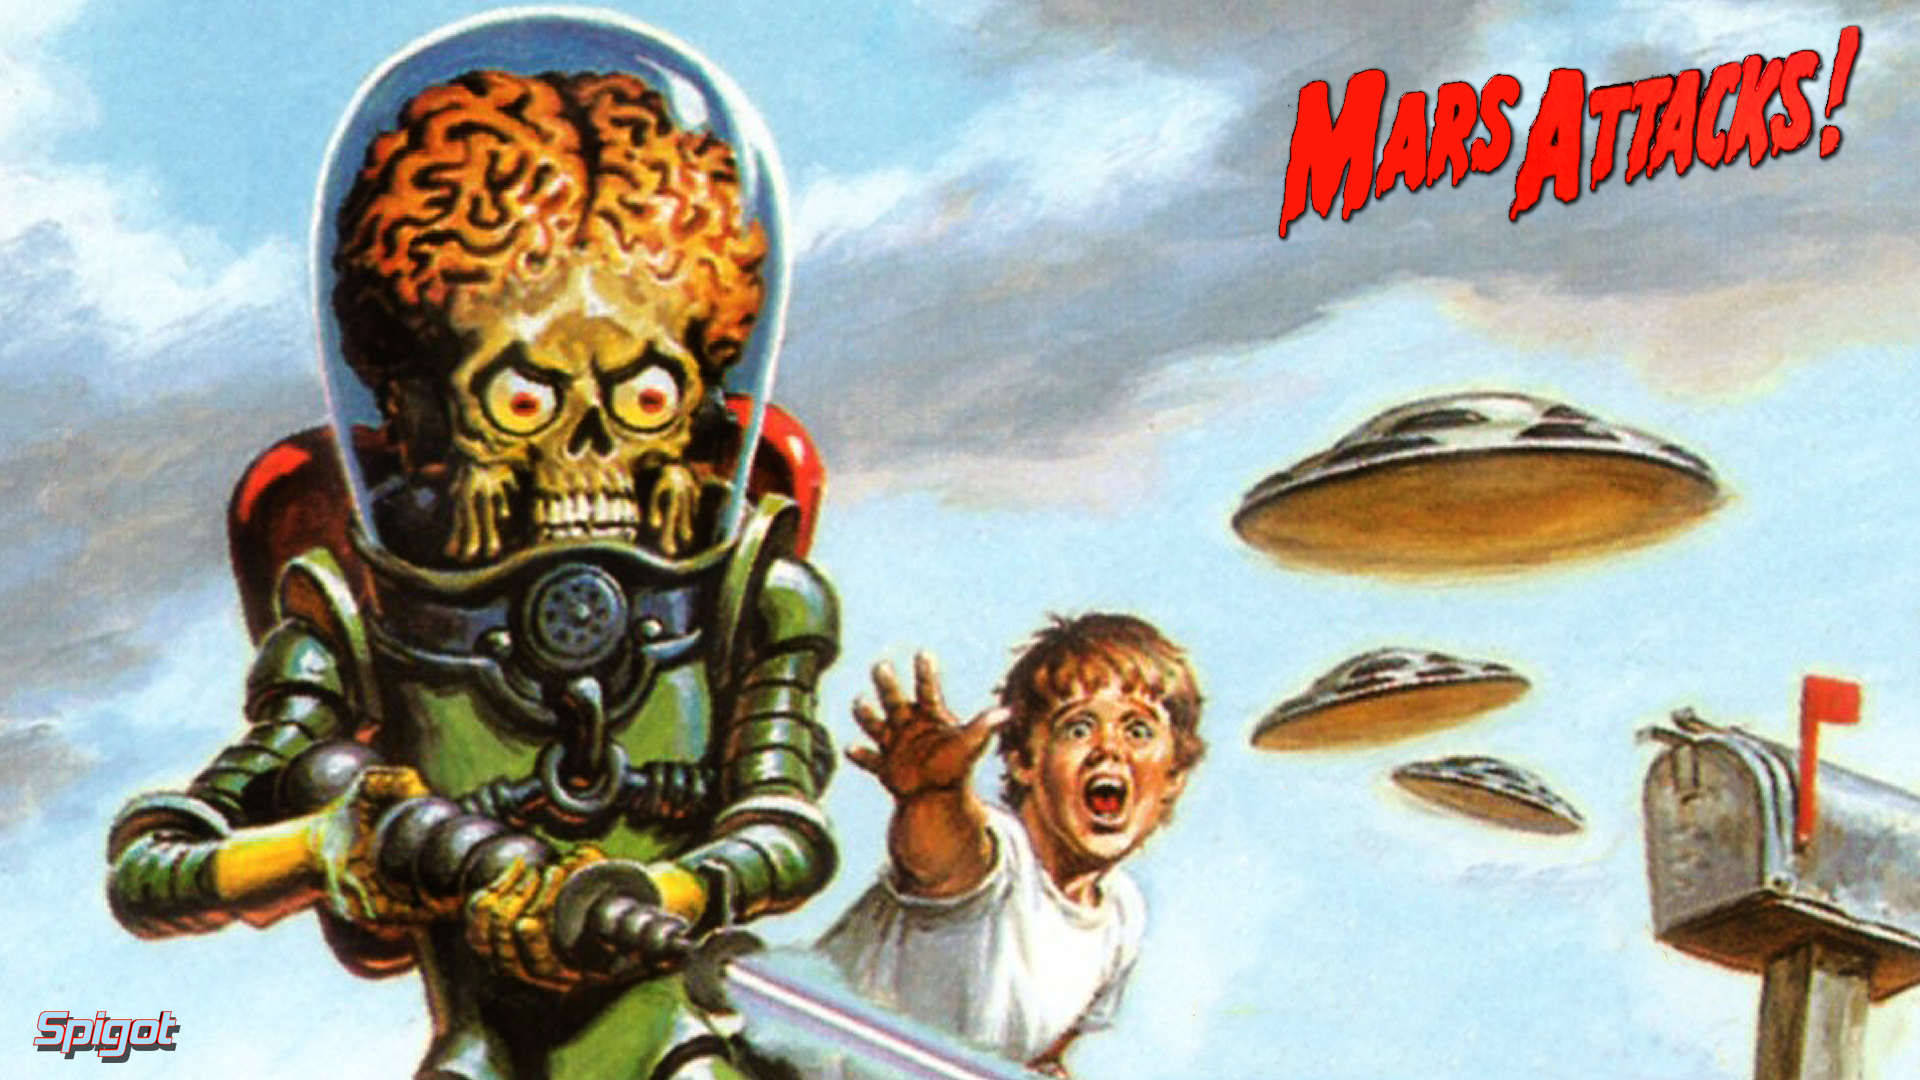 Nice wallpapers Mars Attacks 1920x1080px